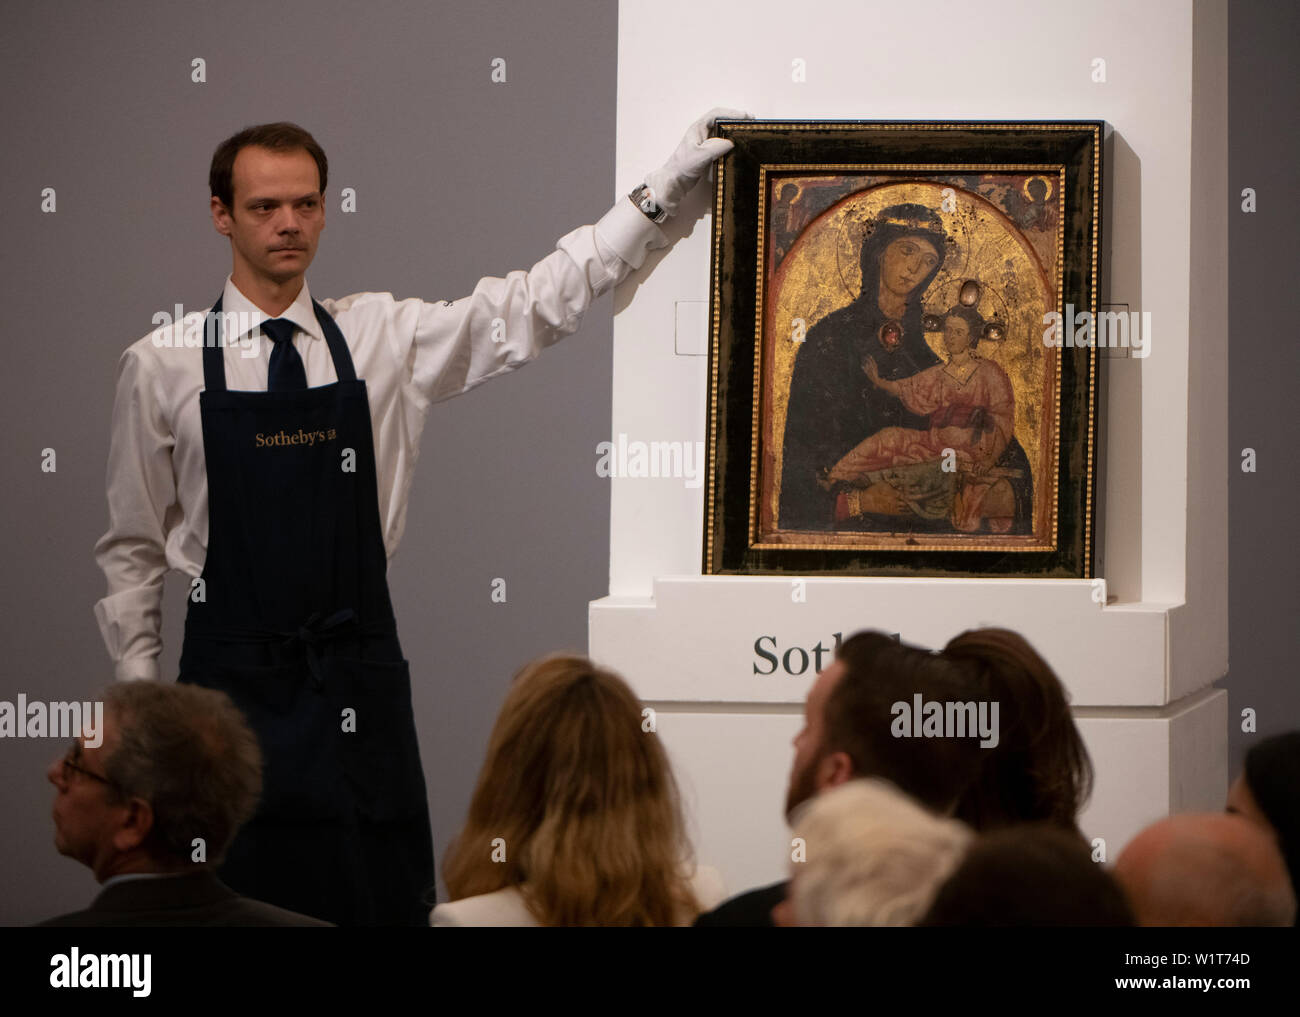 Sotheby’s, London, UK. 3rd July 2019. The summer Old Masters Evening sale offers paintings from the 14th - 19th century by many of the most important painters of Western art. Image: The sale opened with “The Madonna And Child” by Third Master of Anagni which was driven to £735,000 by eight bidders. Dating from the mid-1230s this is the oldest work ever offered in an Old Masters sale at Sotheby’s. Credit: Malcolm Park/Alamy Live News. Stock Photo